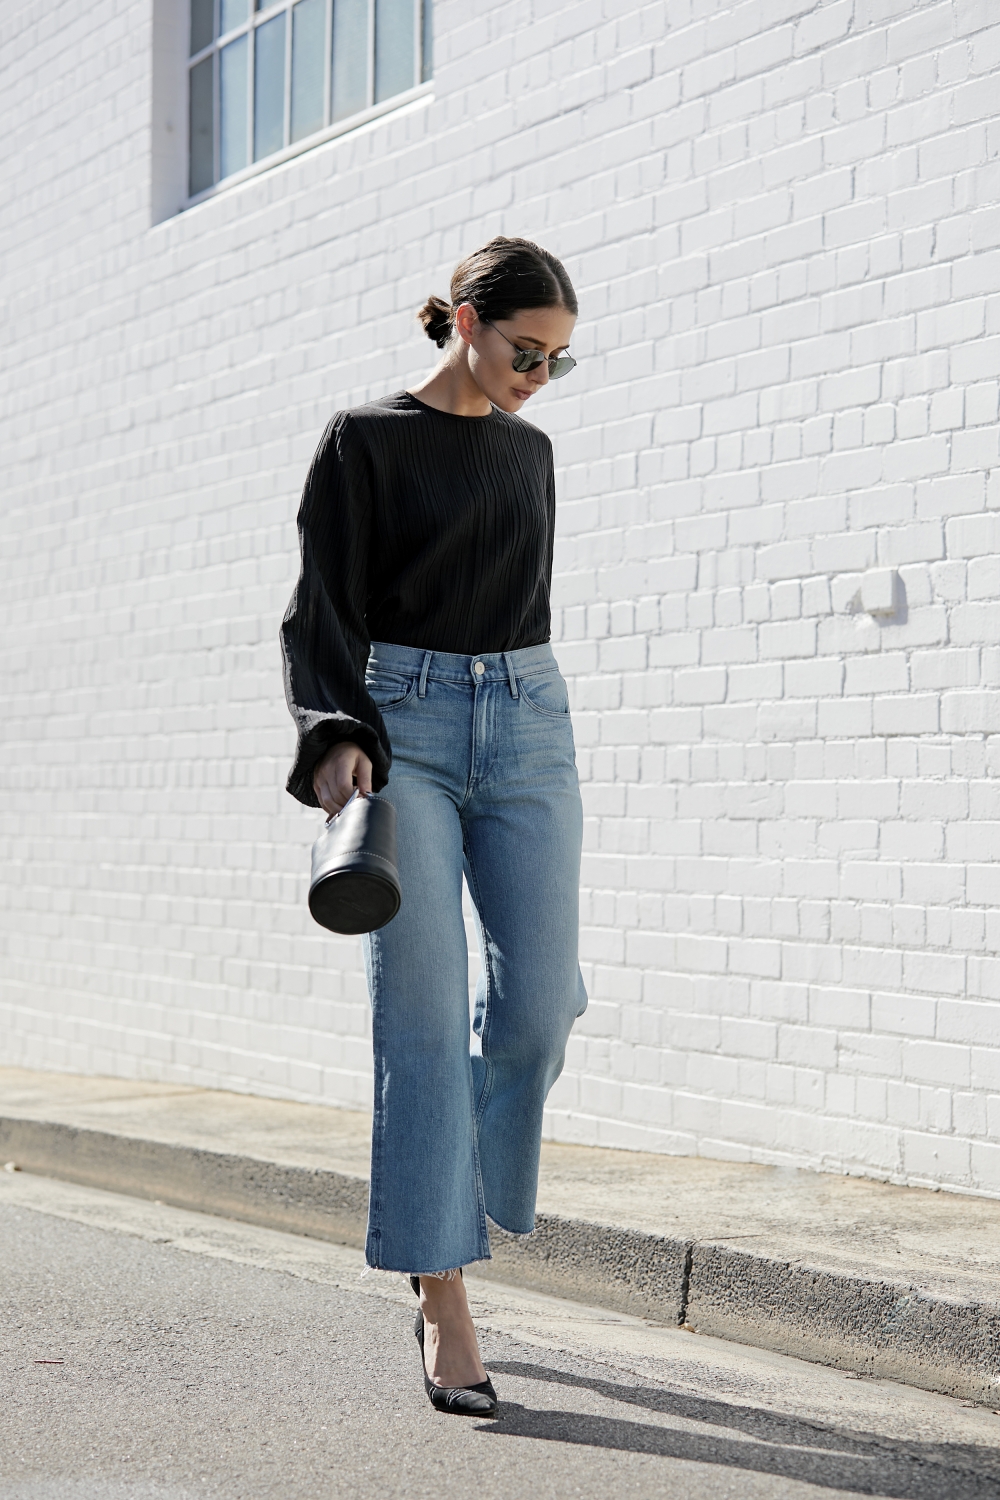 Get This Stylish Denim Date Look With 4 Under-$100 Pieces